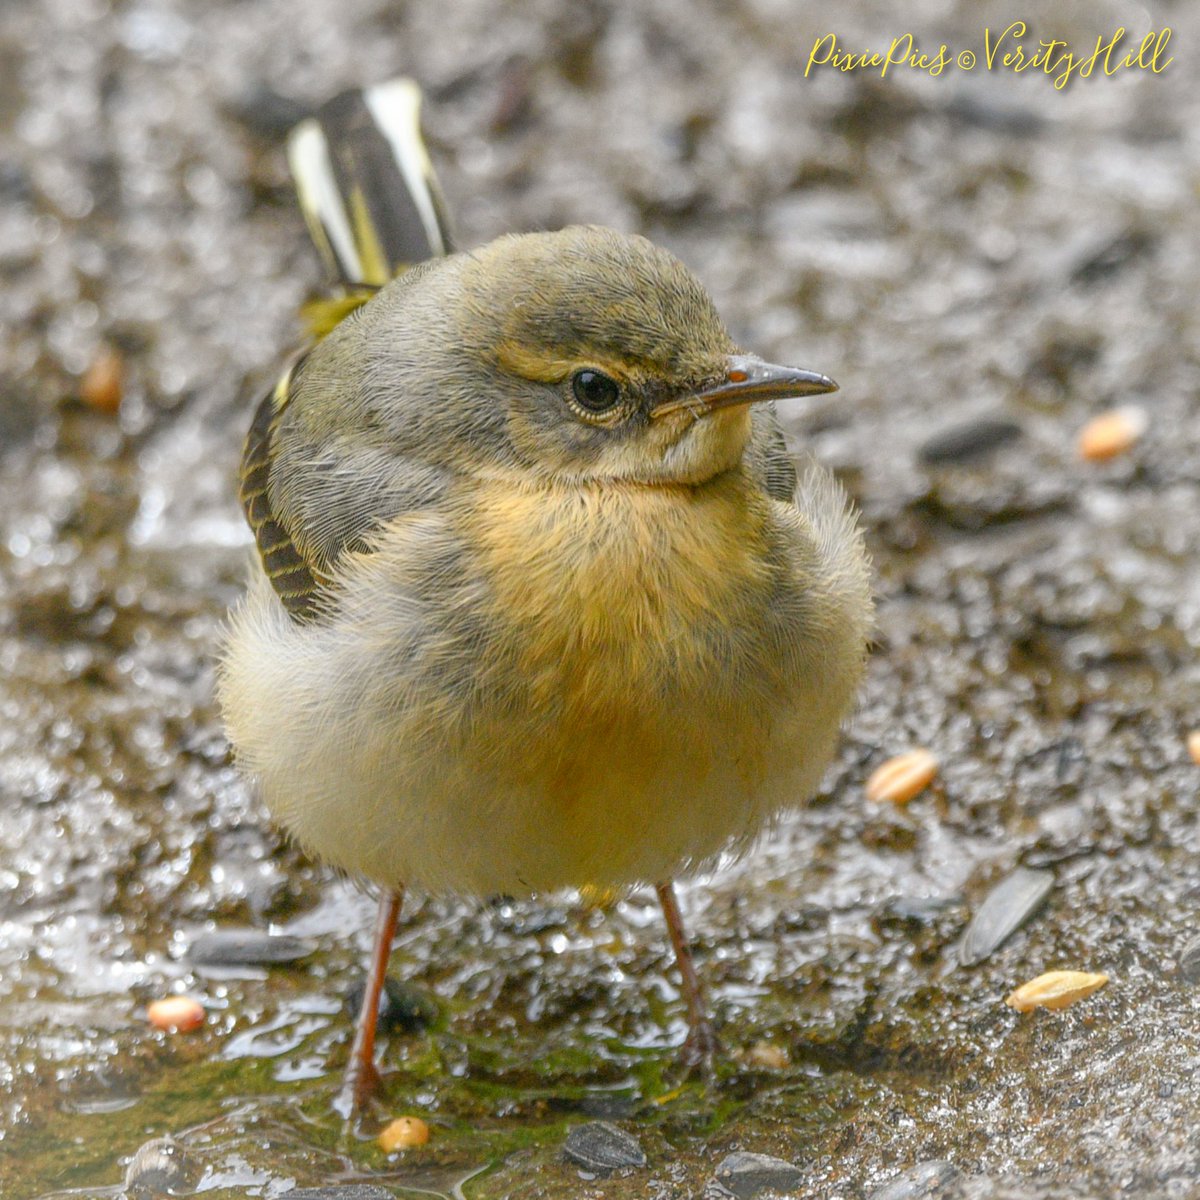 Had a beautiful time visiting my mum in Cornwall after 6months 😍 We had a lovely walk in Tehidy Woods and saw so much 💛 Our favourite was this little Grey Wagtail 🍋 #walkinnature #greywagtail #motacillacinerea #birdphotography #birdwatching #bbcspringwatch #bbcWildlifePOTD